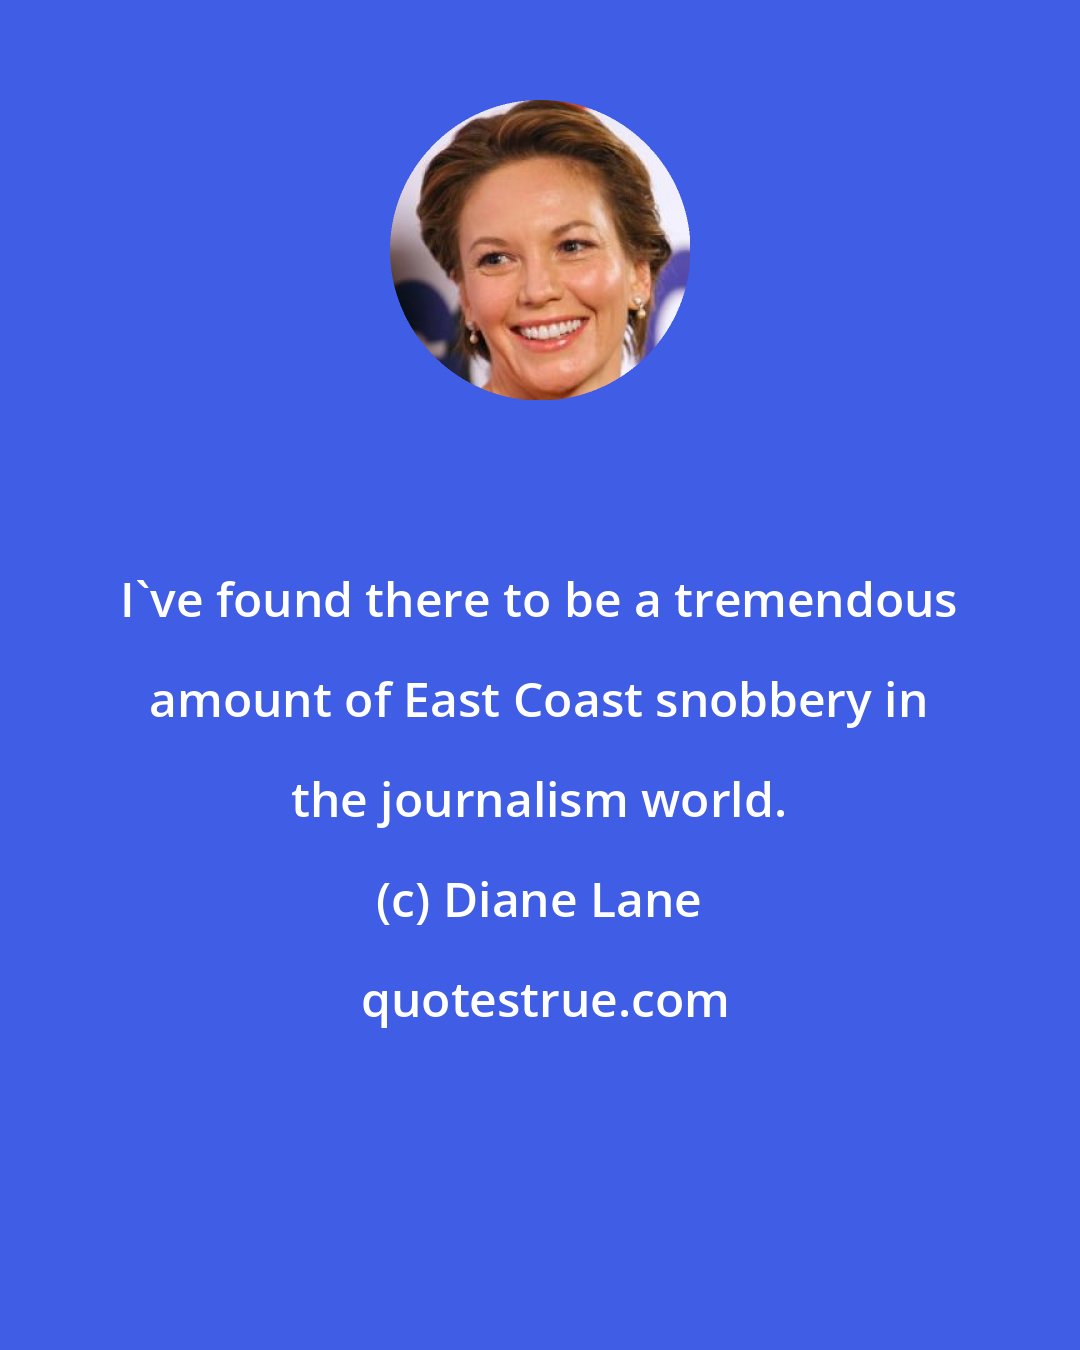 Diane Lane: I've found there to be a tremendous amount of East Coast snobbery in the journalism world.